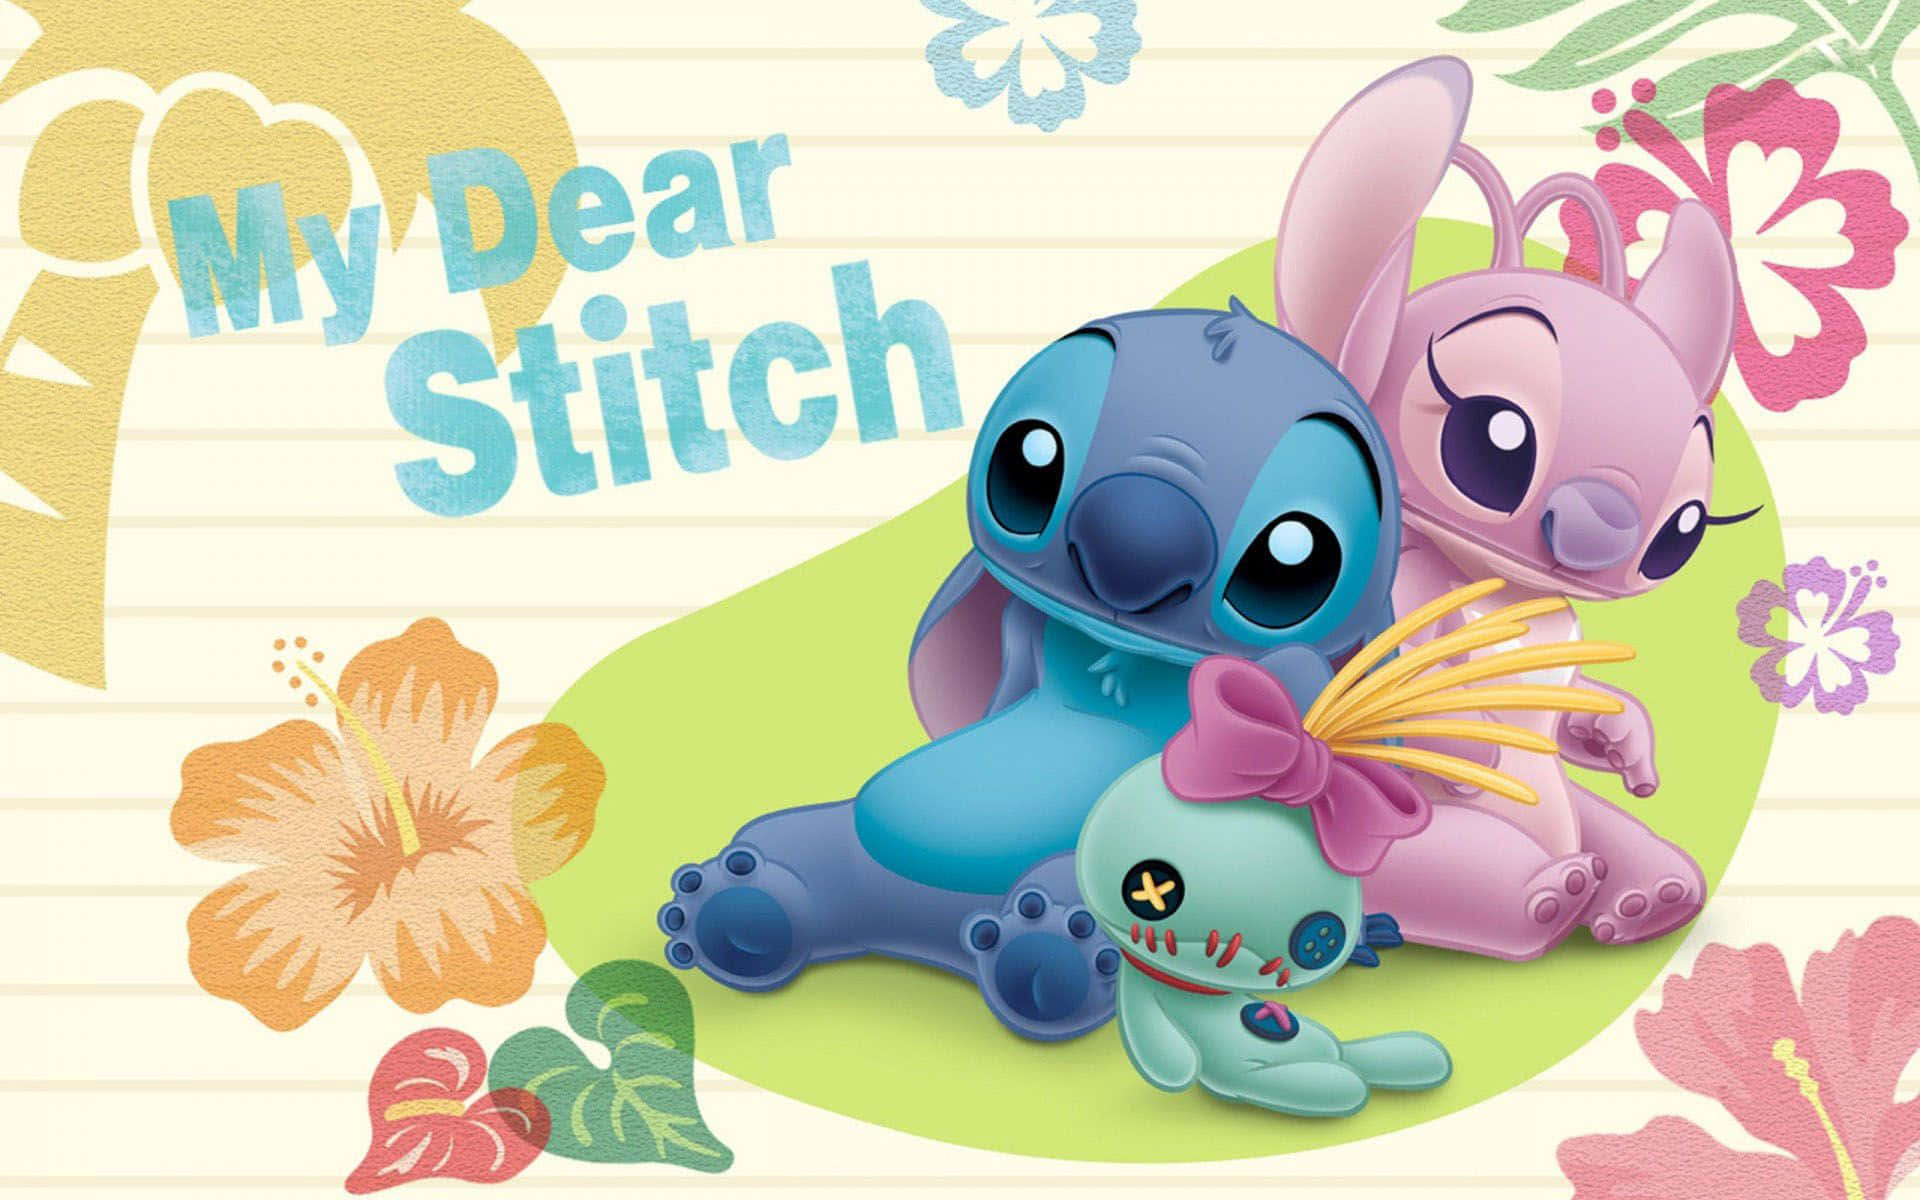 Look at this adorable Cute Baby Stitch Wallpaper